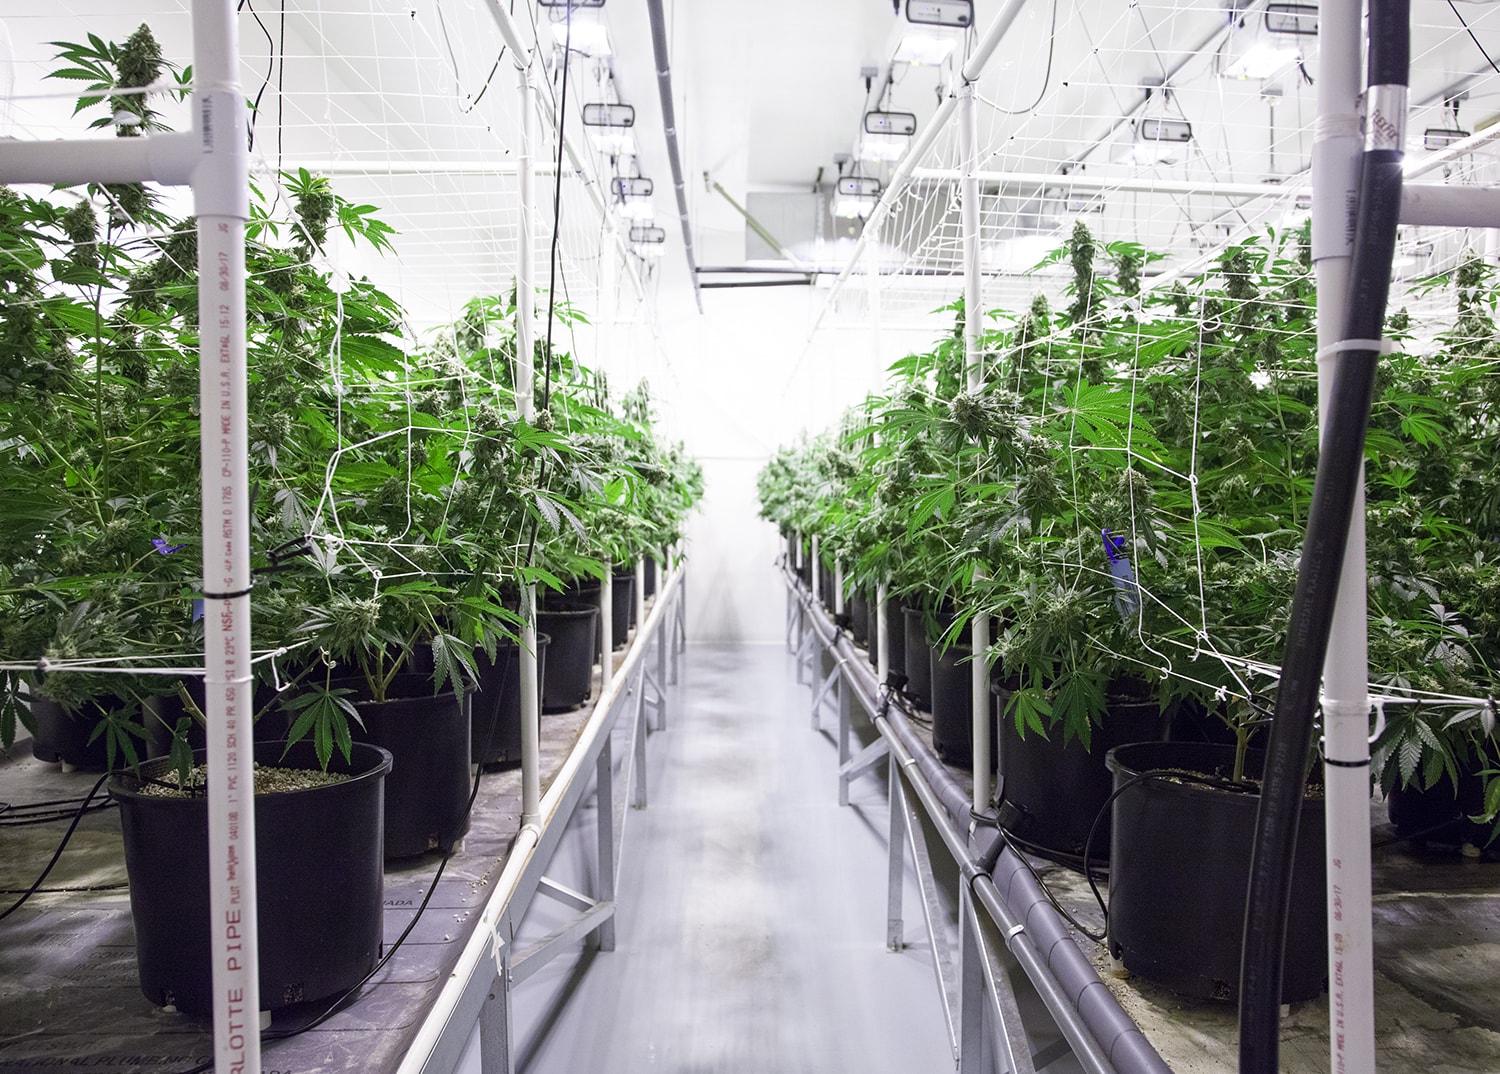 view of an indoor cannabis grow room